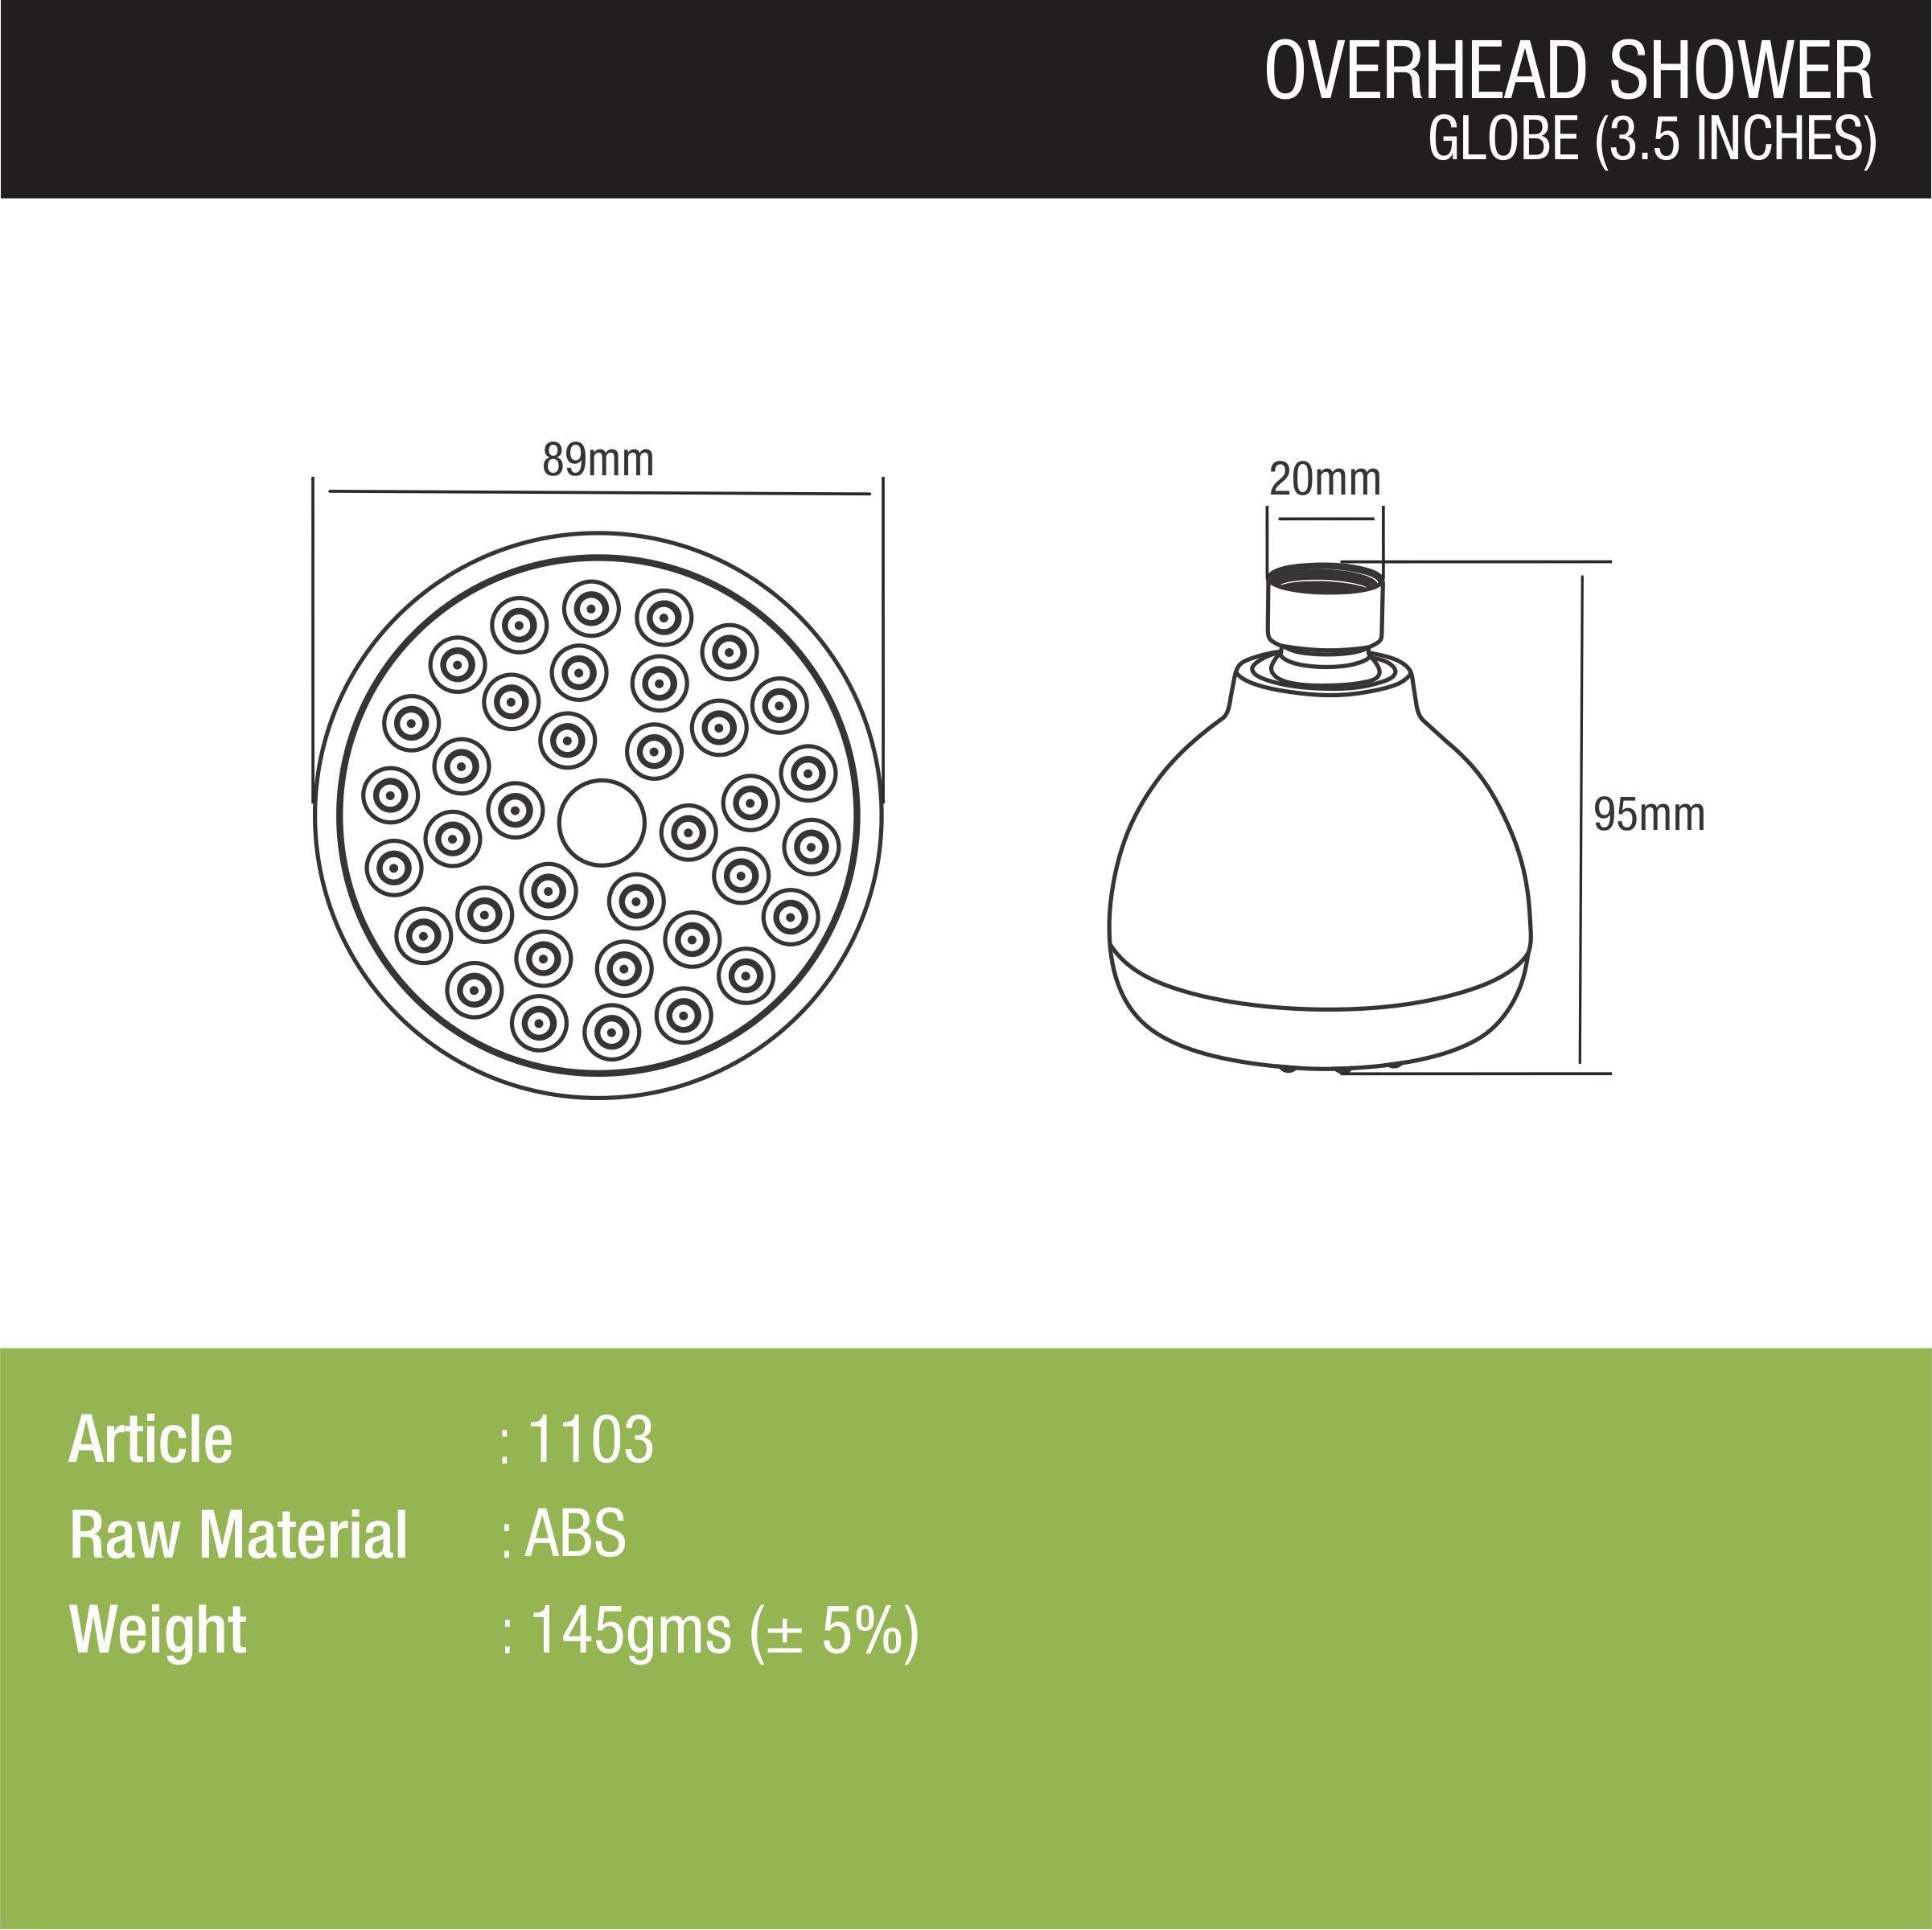 Globe Overhead Shower (5 Inches) dimensions and sizes